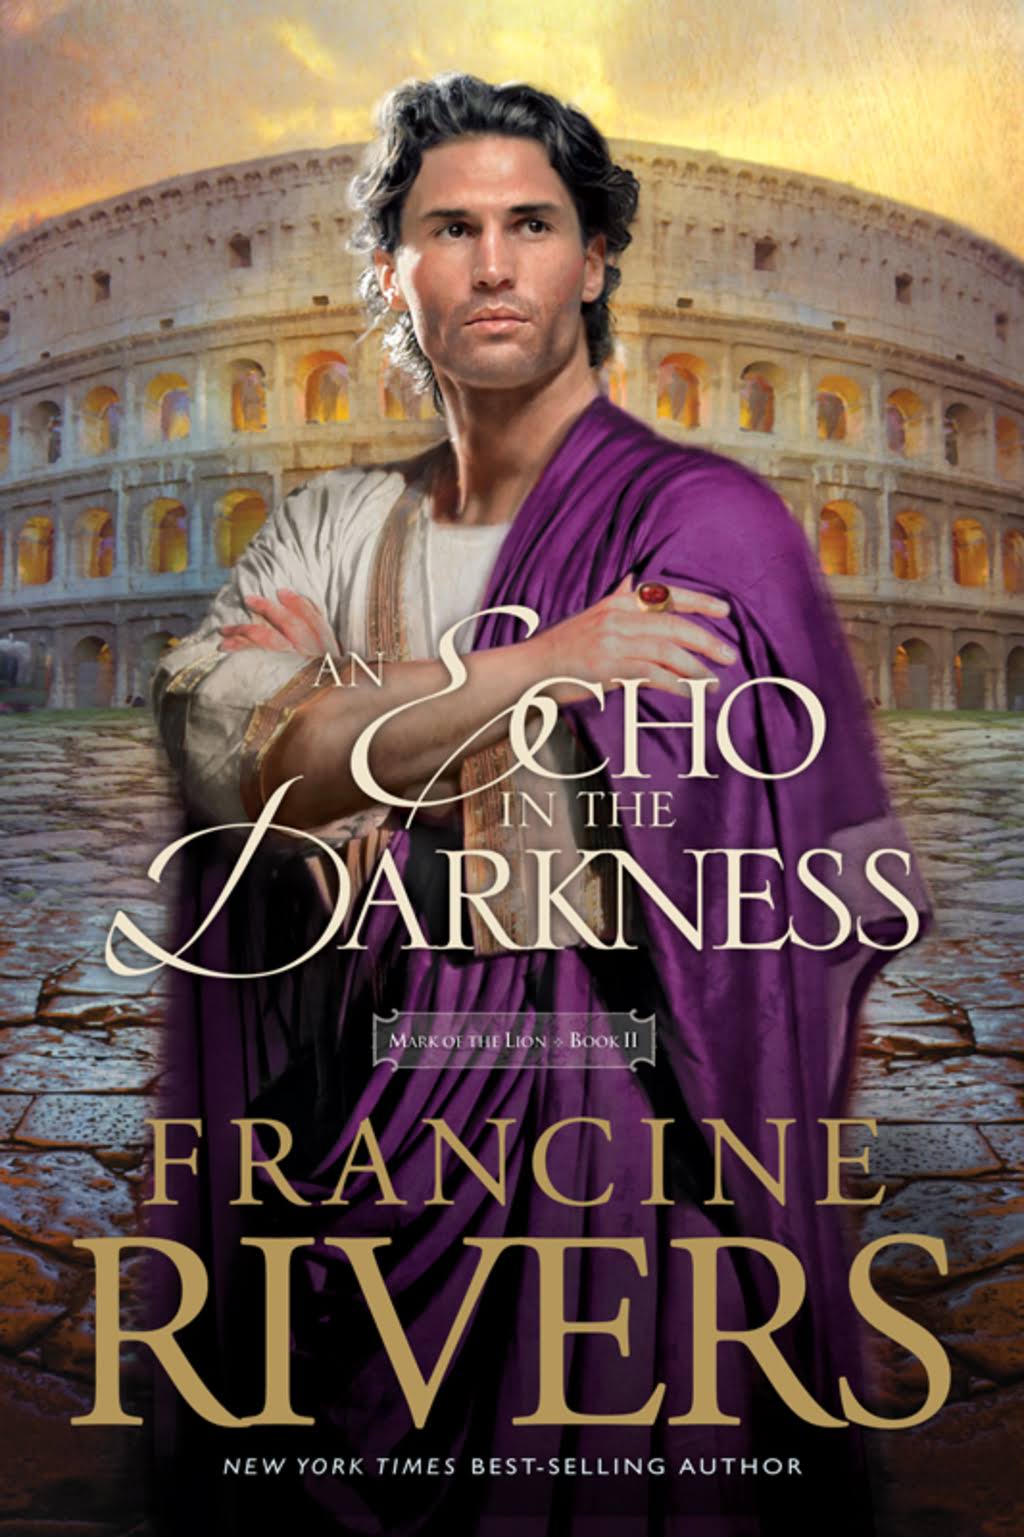 An Echo in the Darkness [Book]